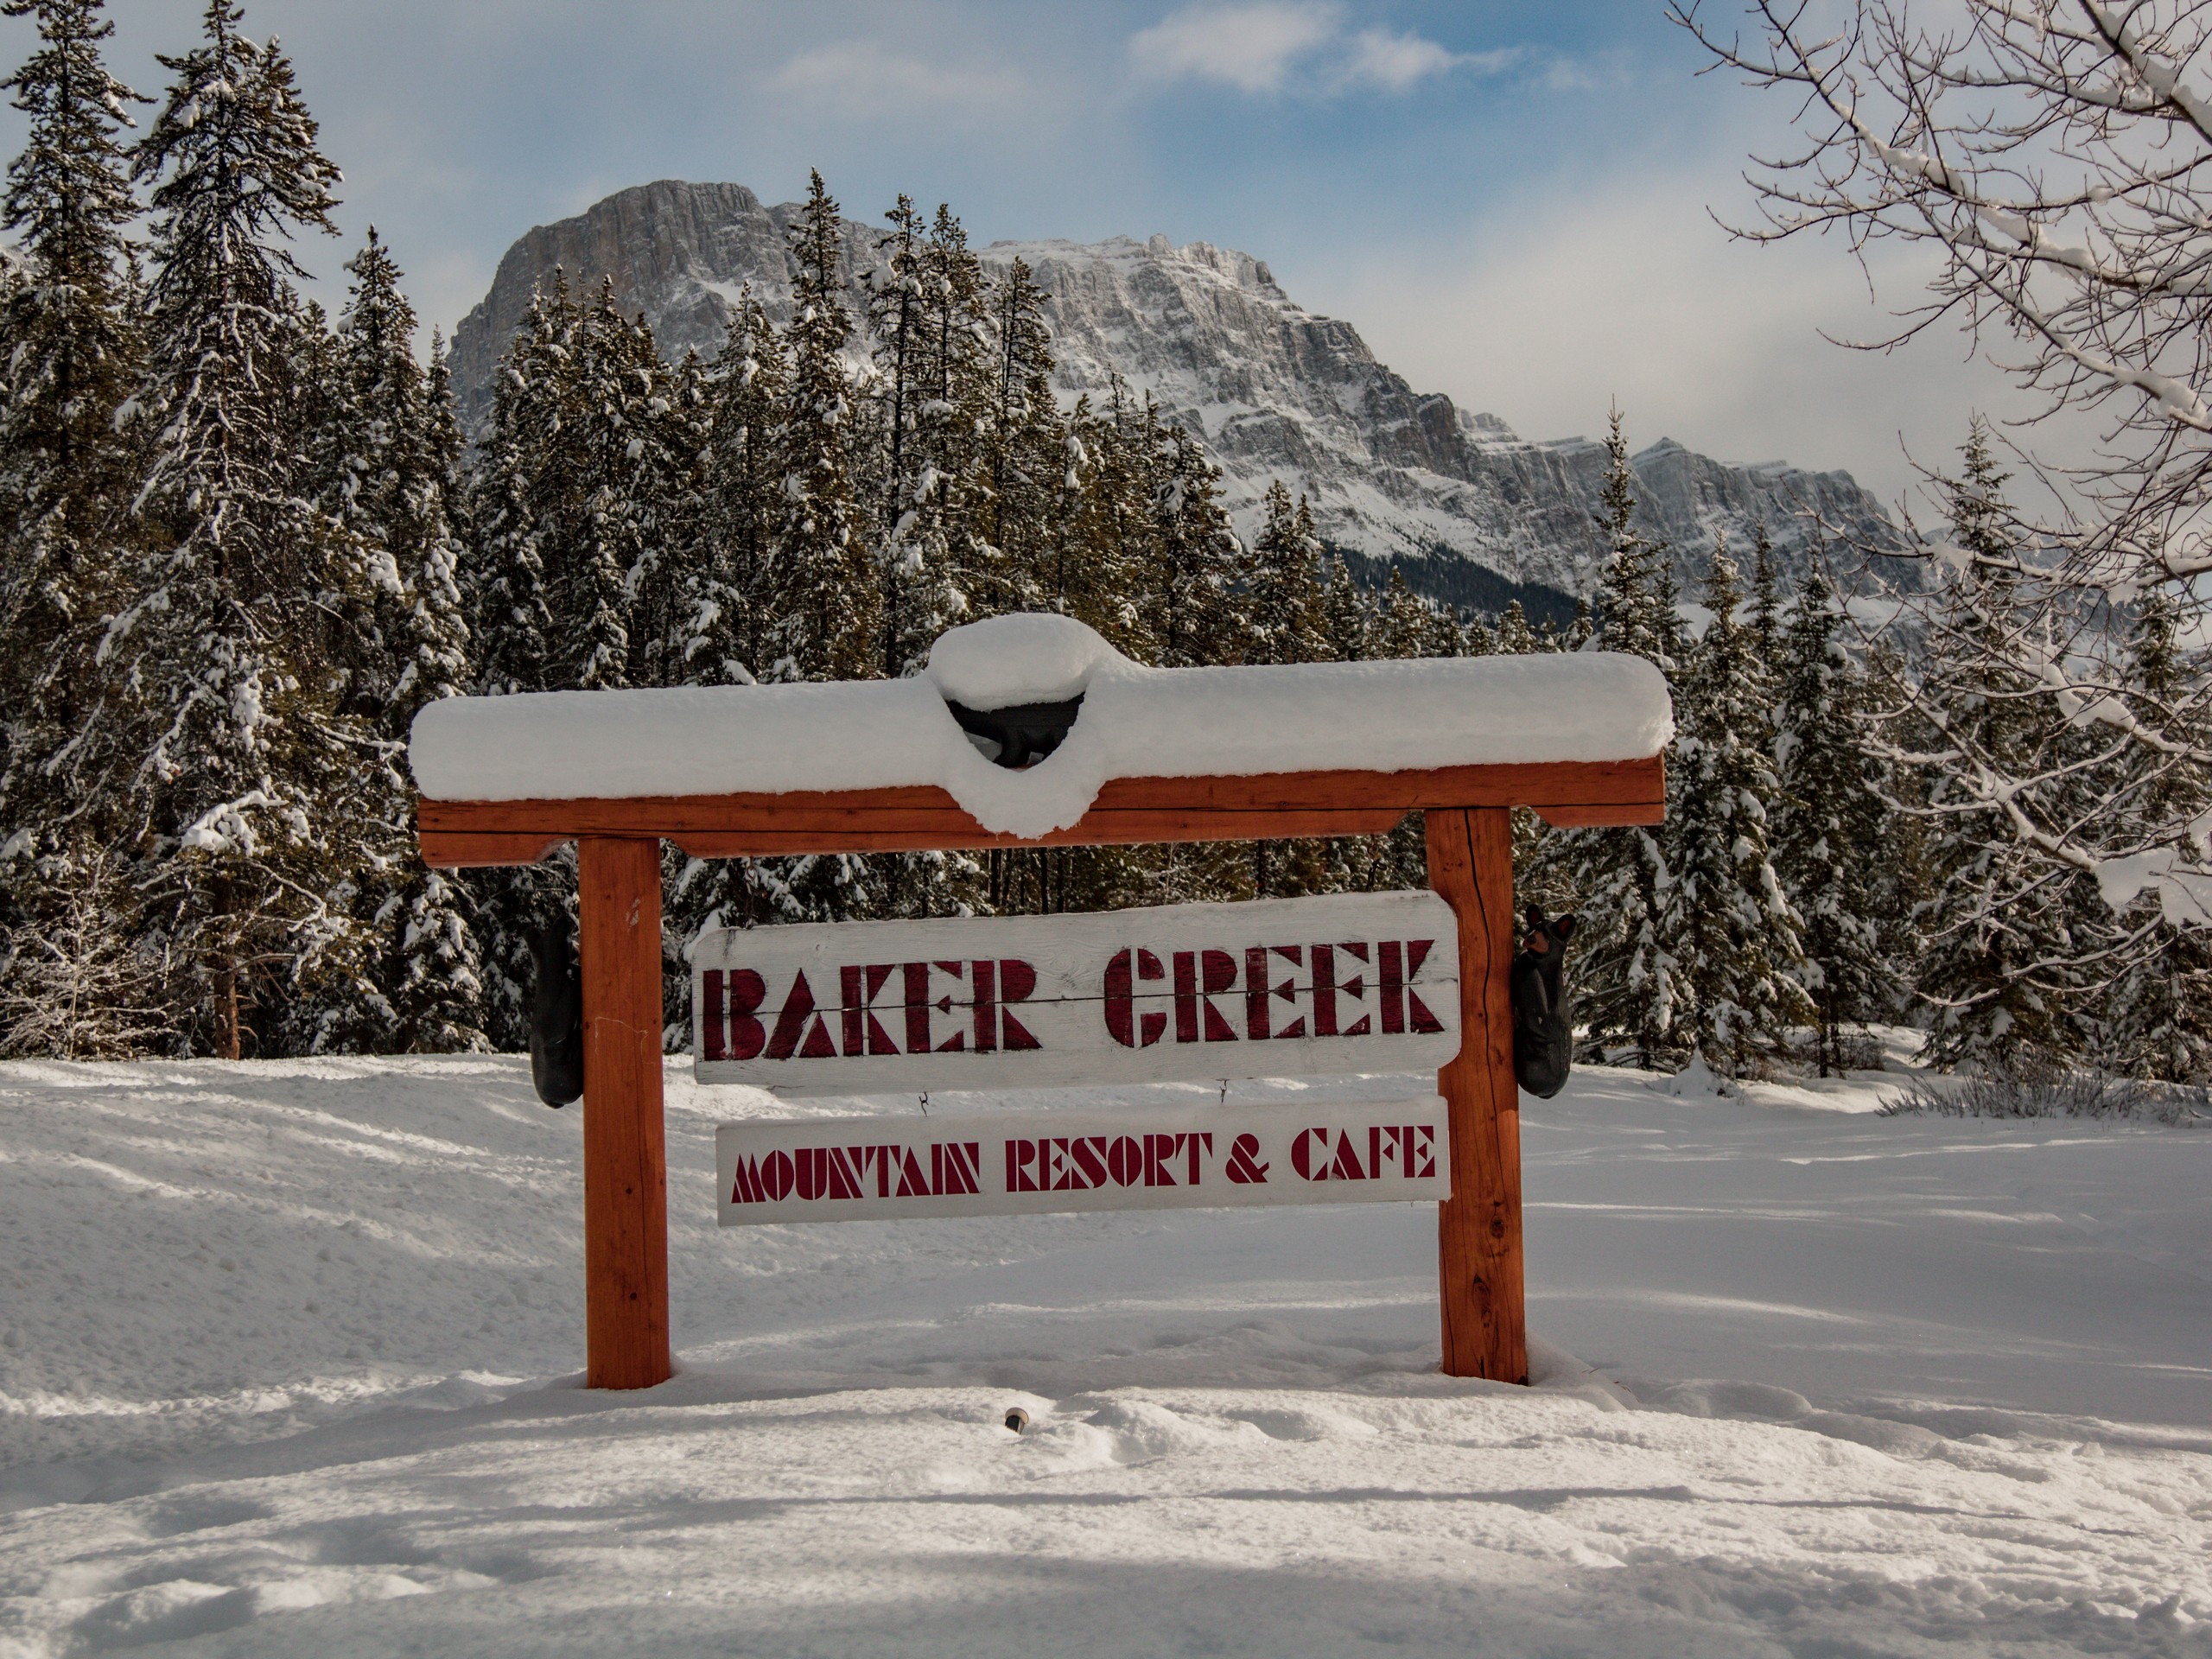 Entry sign to Baker Creek